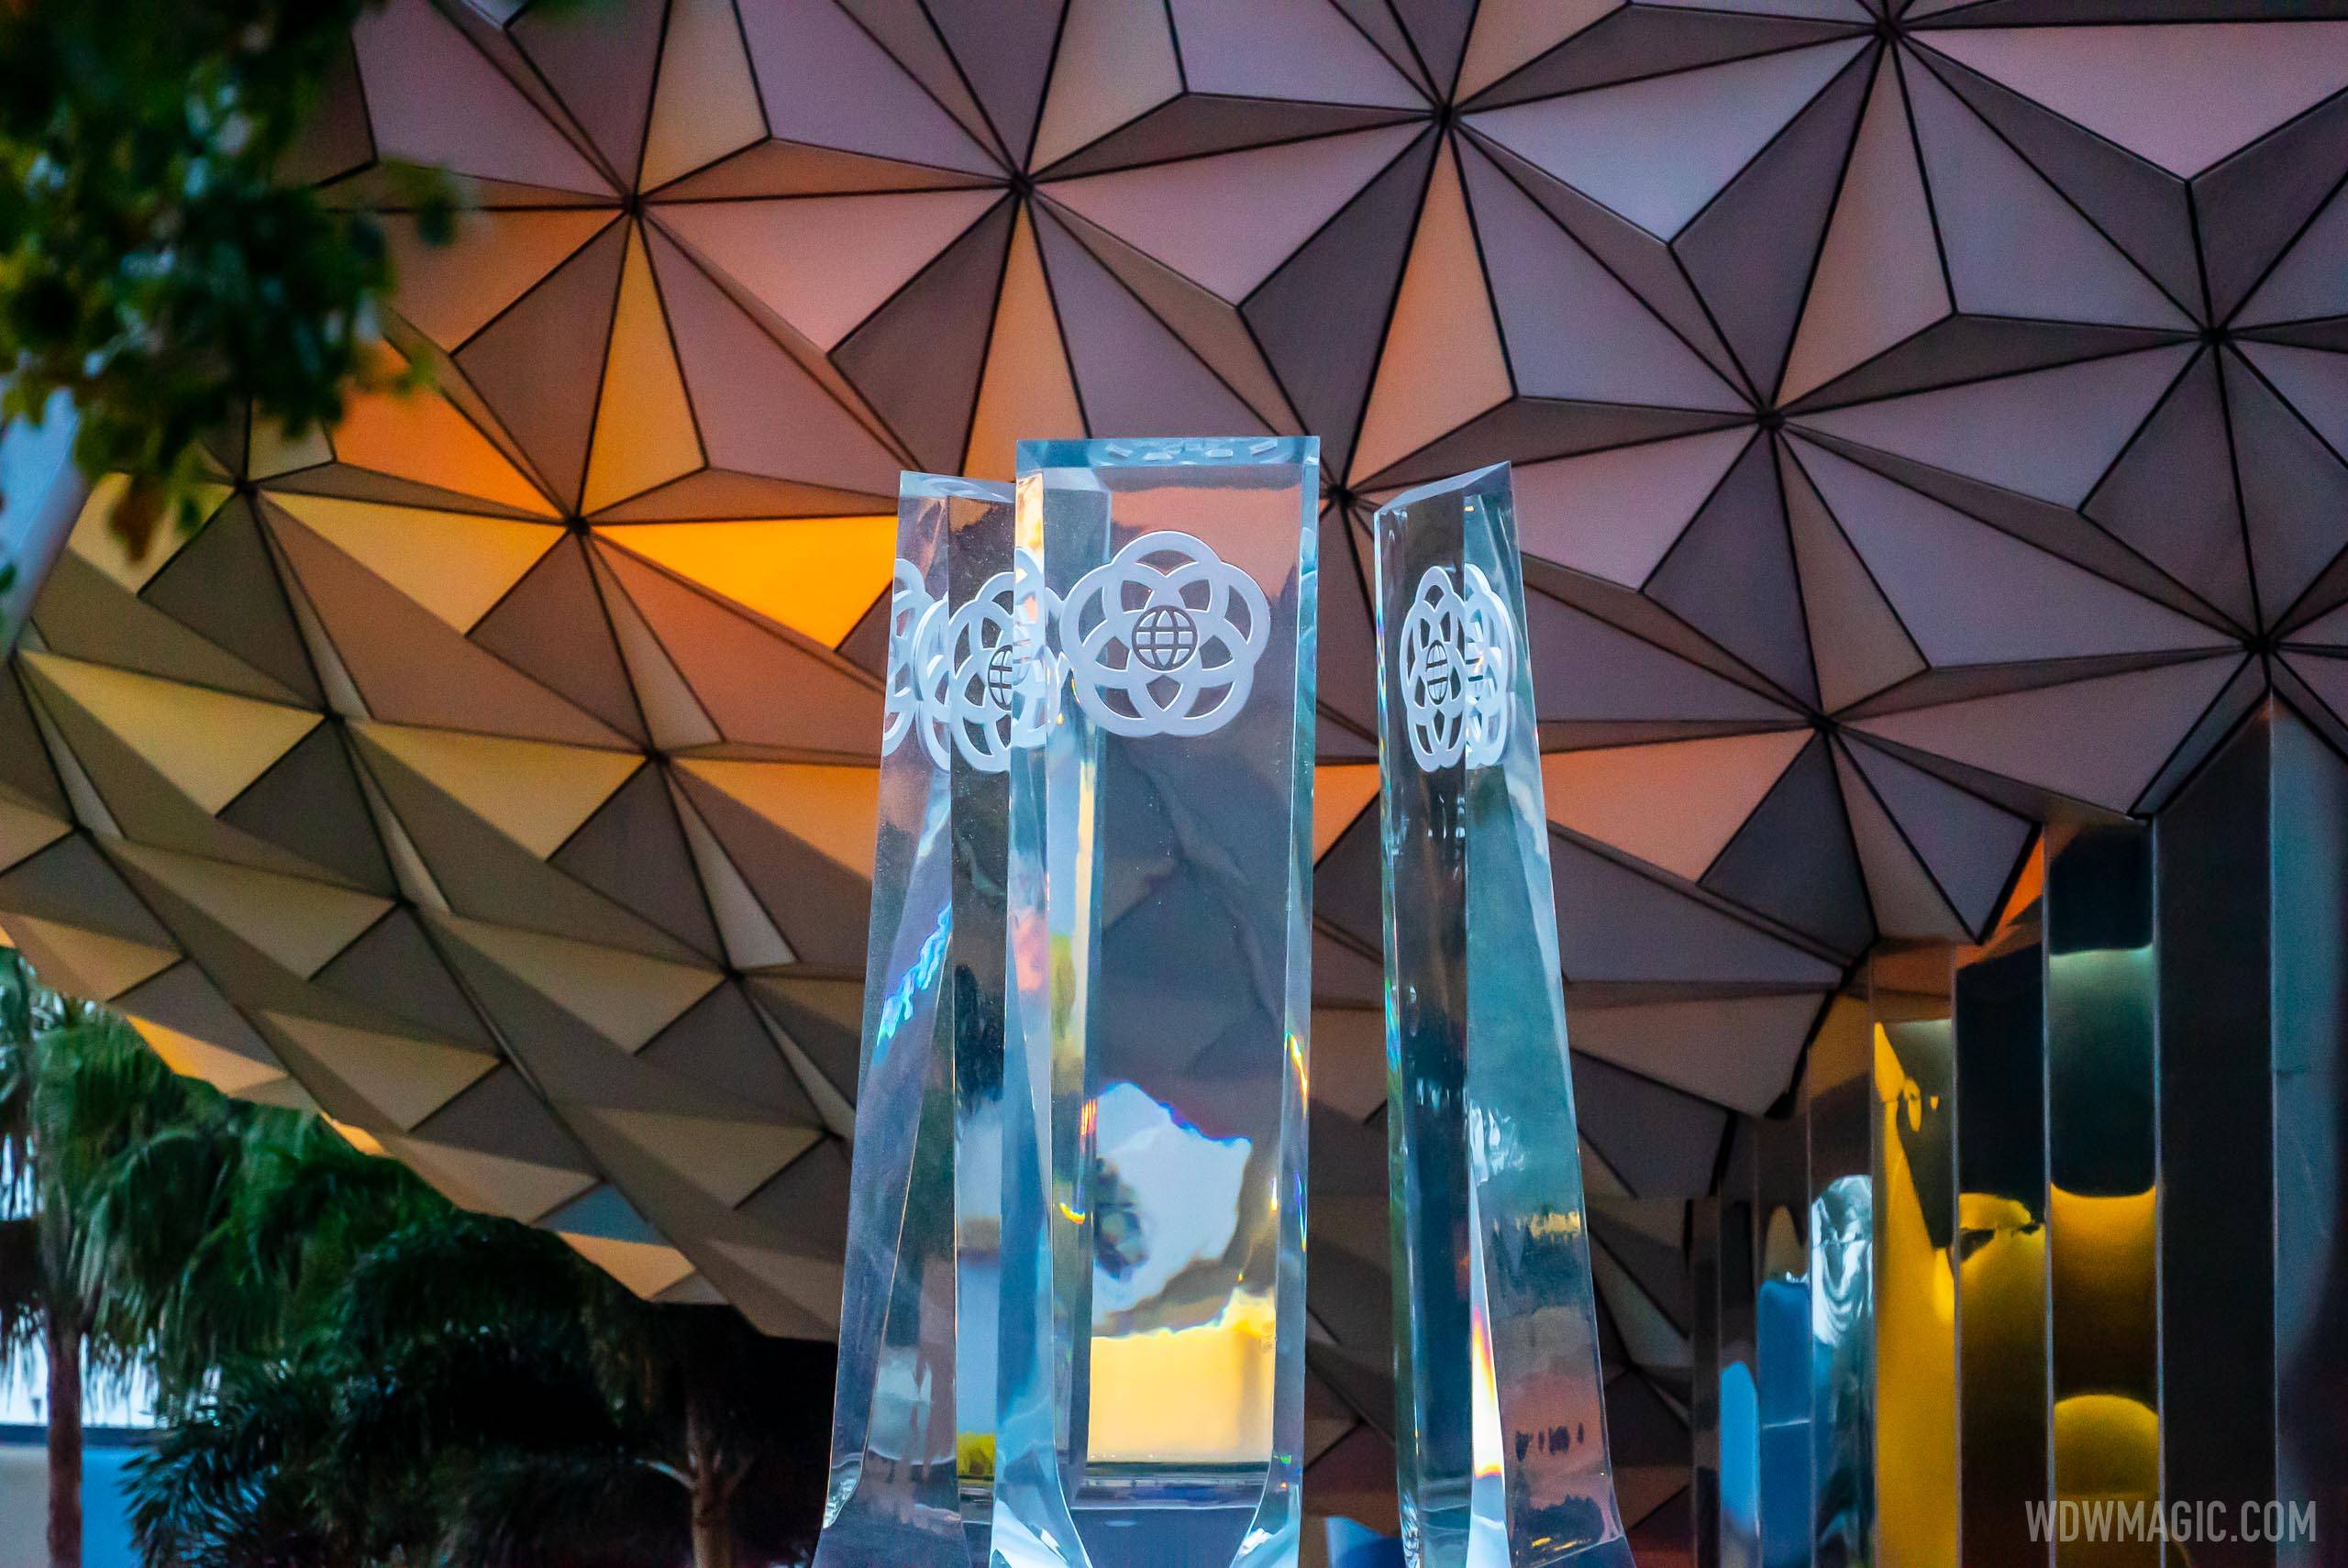 A new lighting package is coming to the exterior of Spaceship Earth